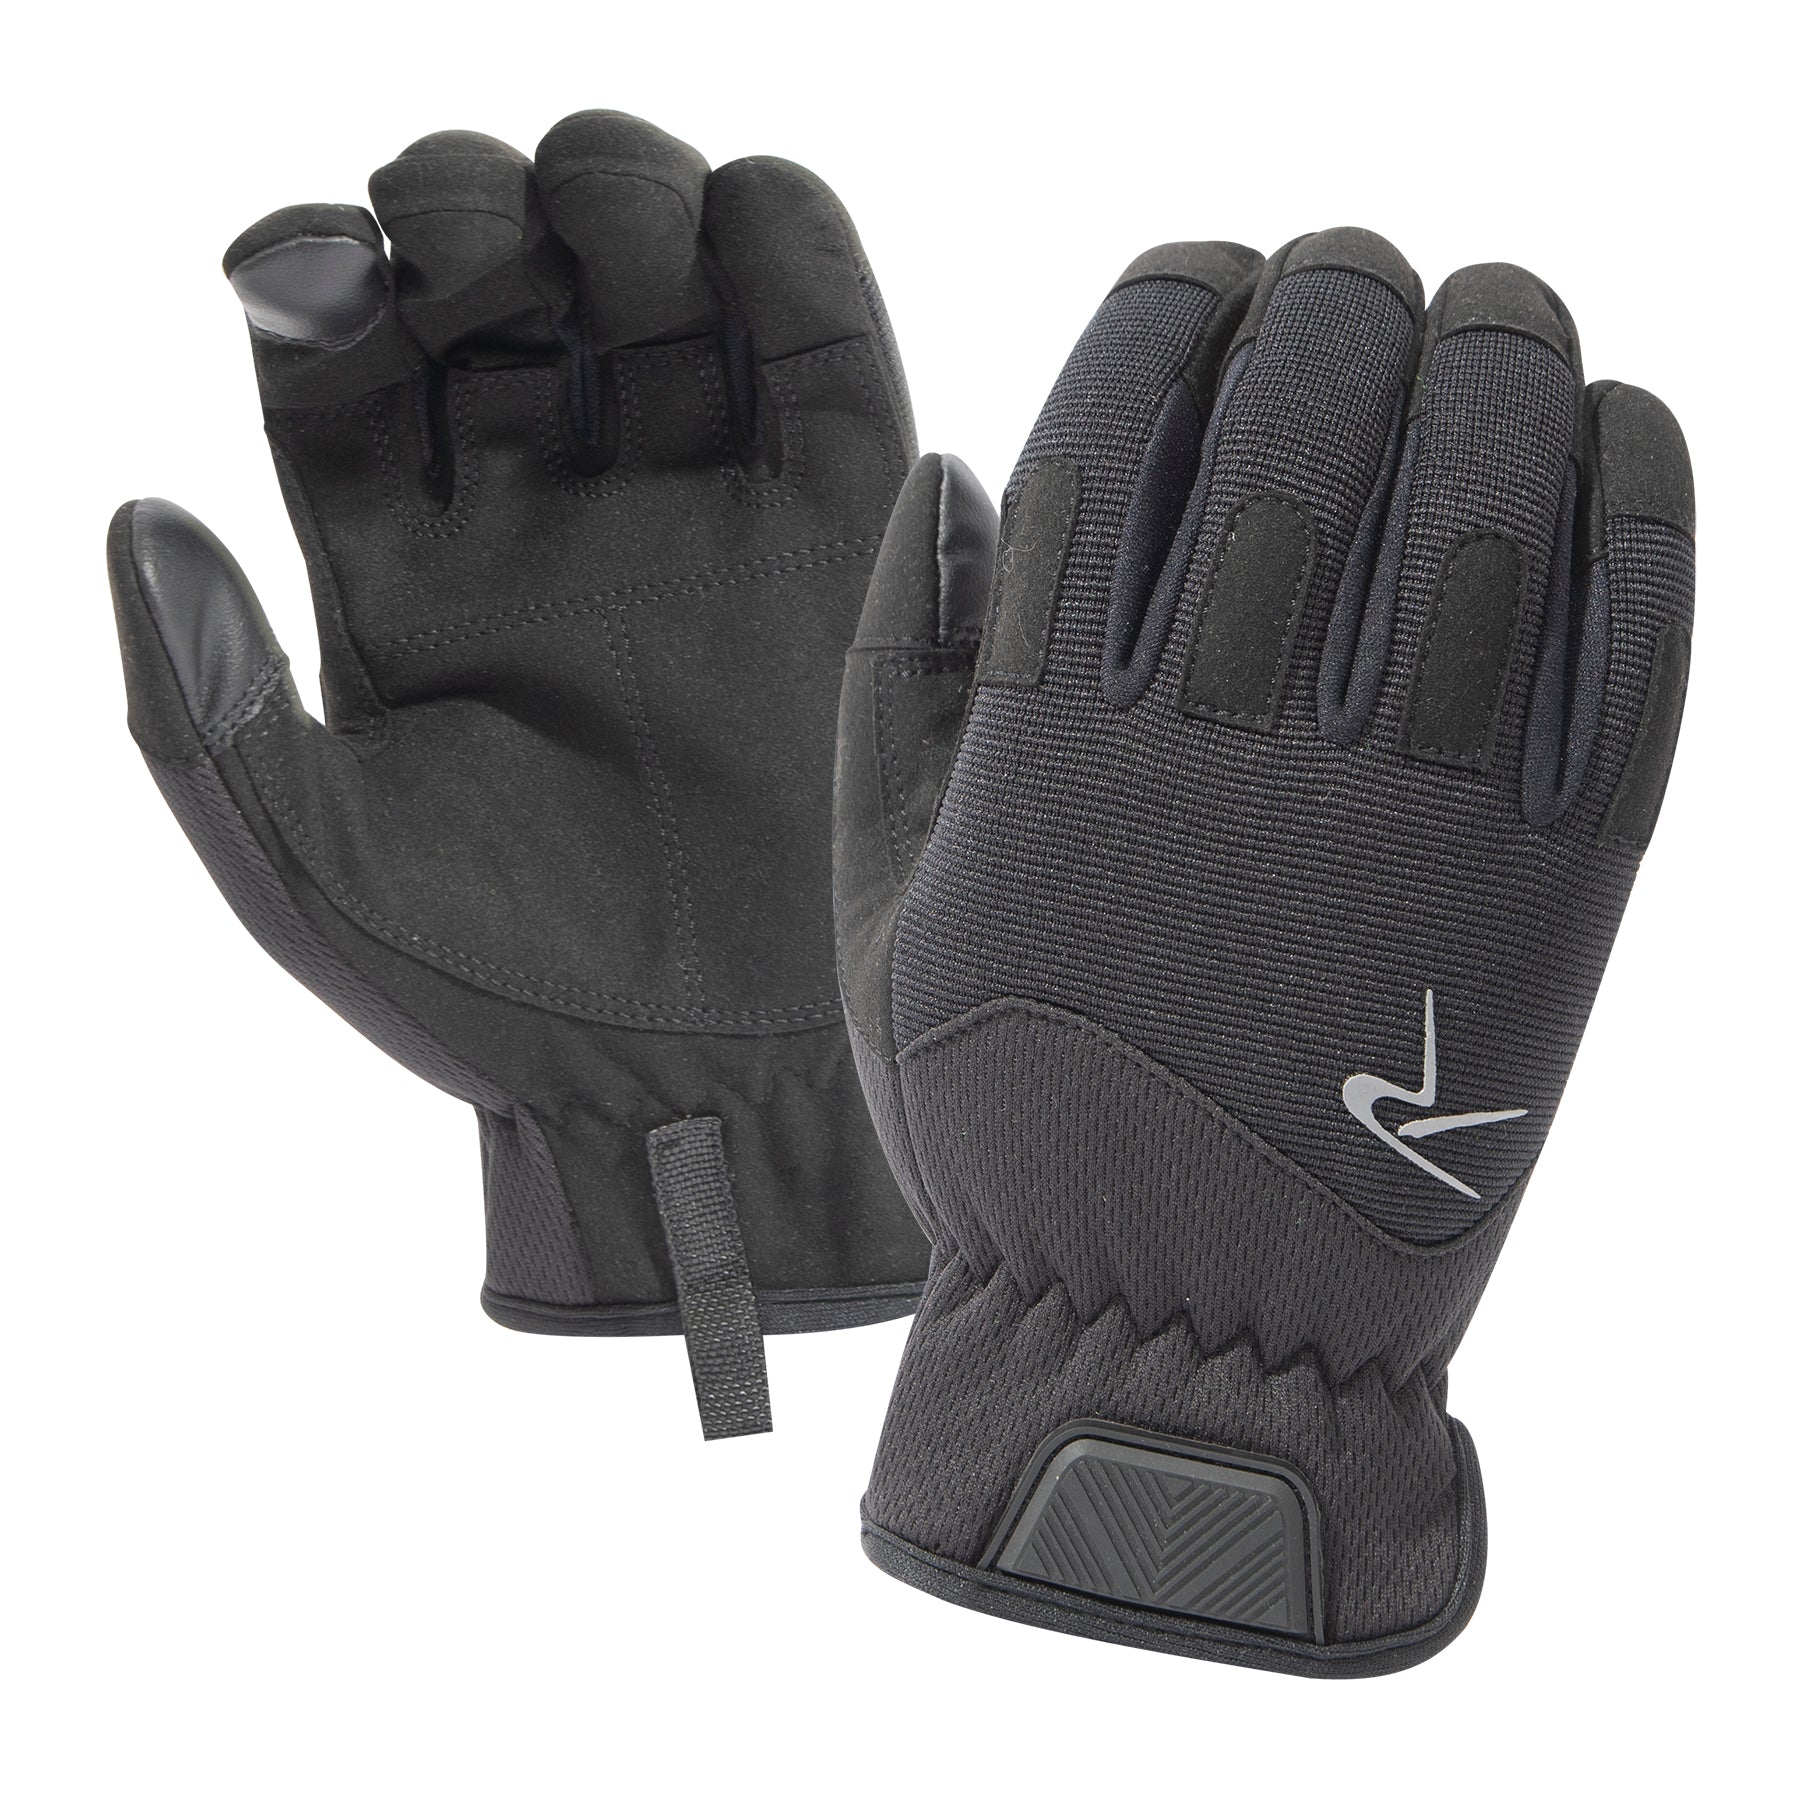 Rothco Rapid Fit Duty Gloves - Tactical Choice Plus